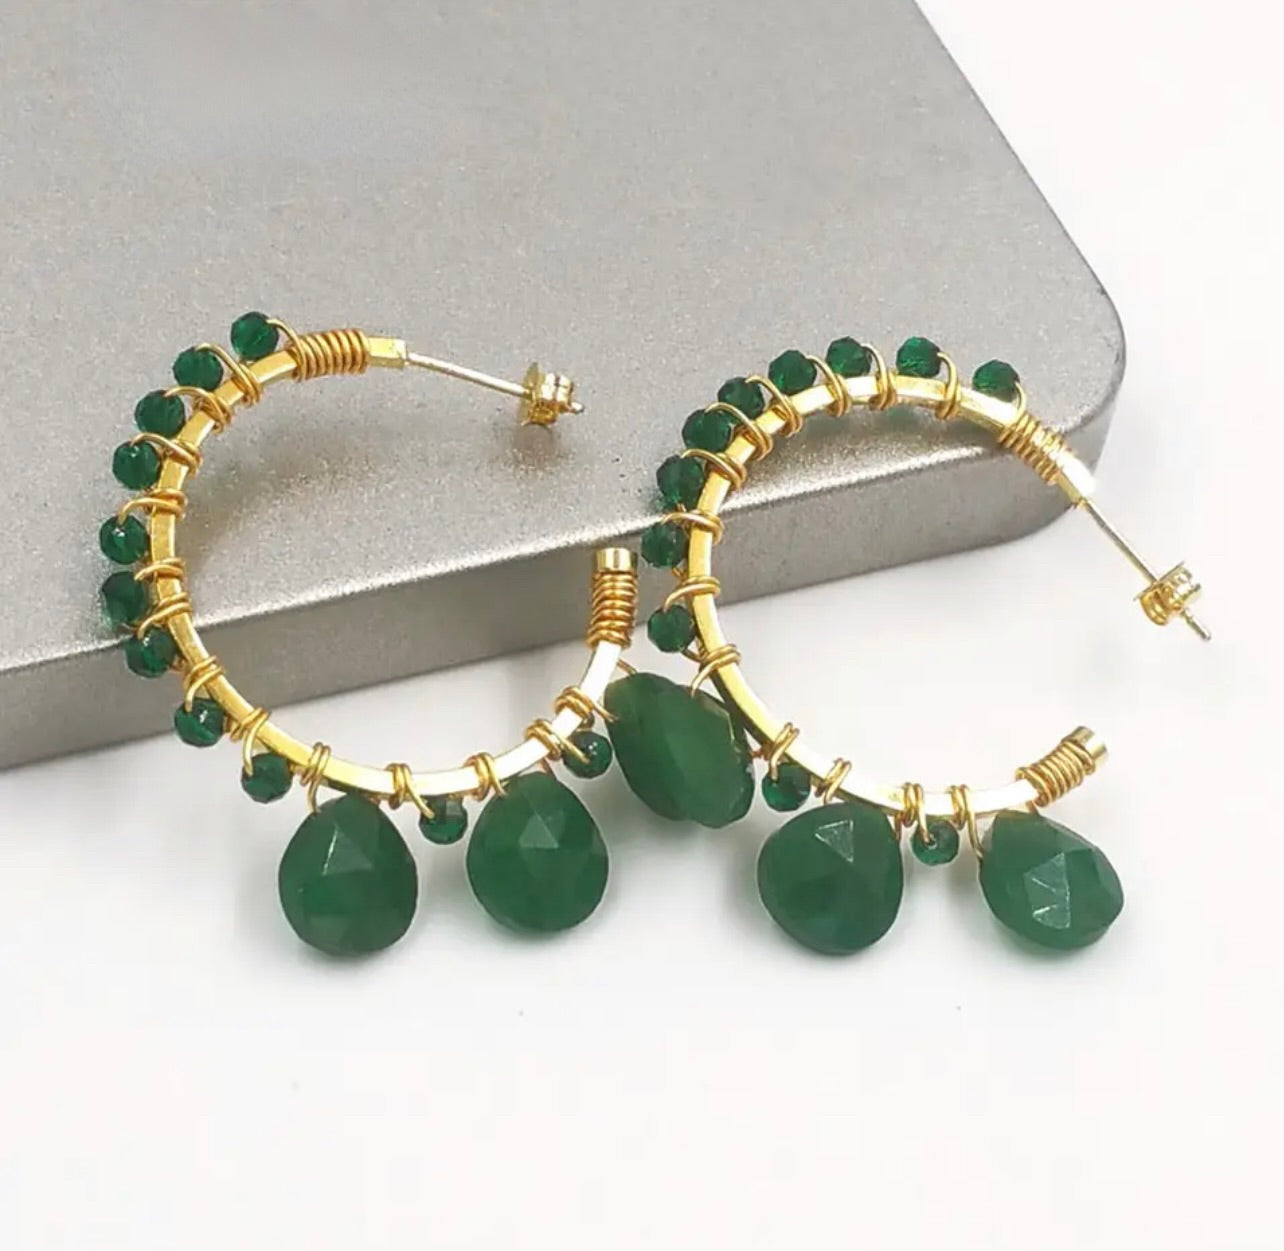 Stainless steel Hoops with Faceted Green Agate and Teardrop Gemstones